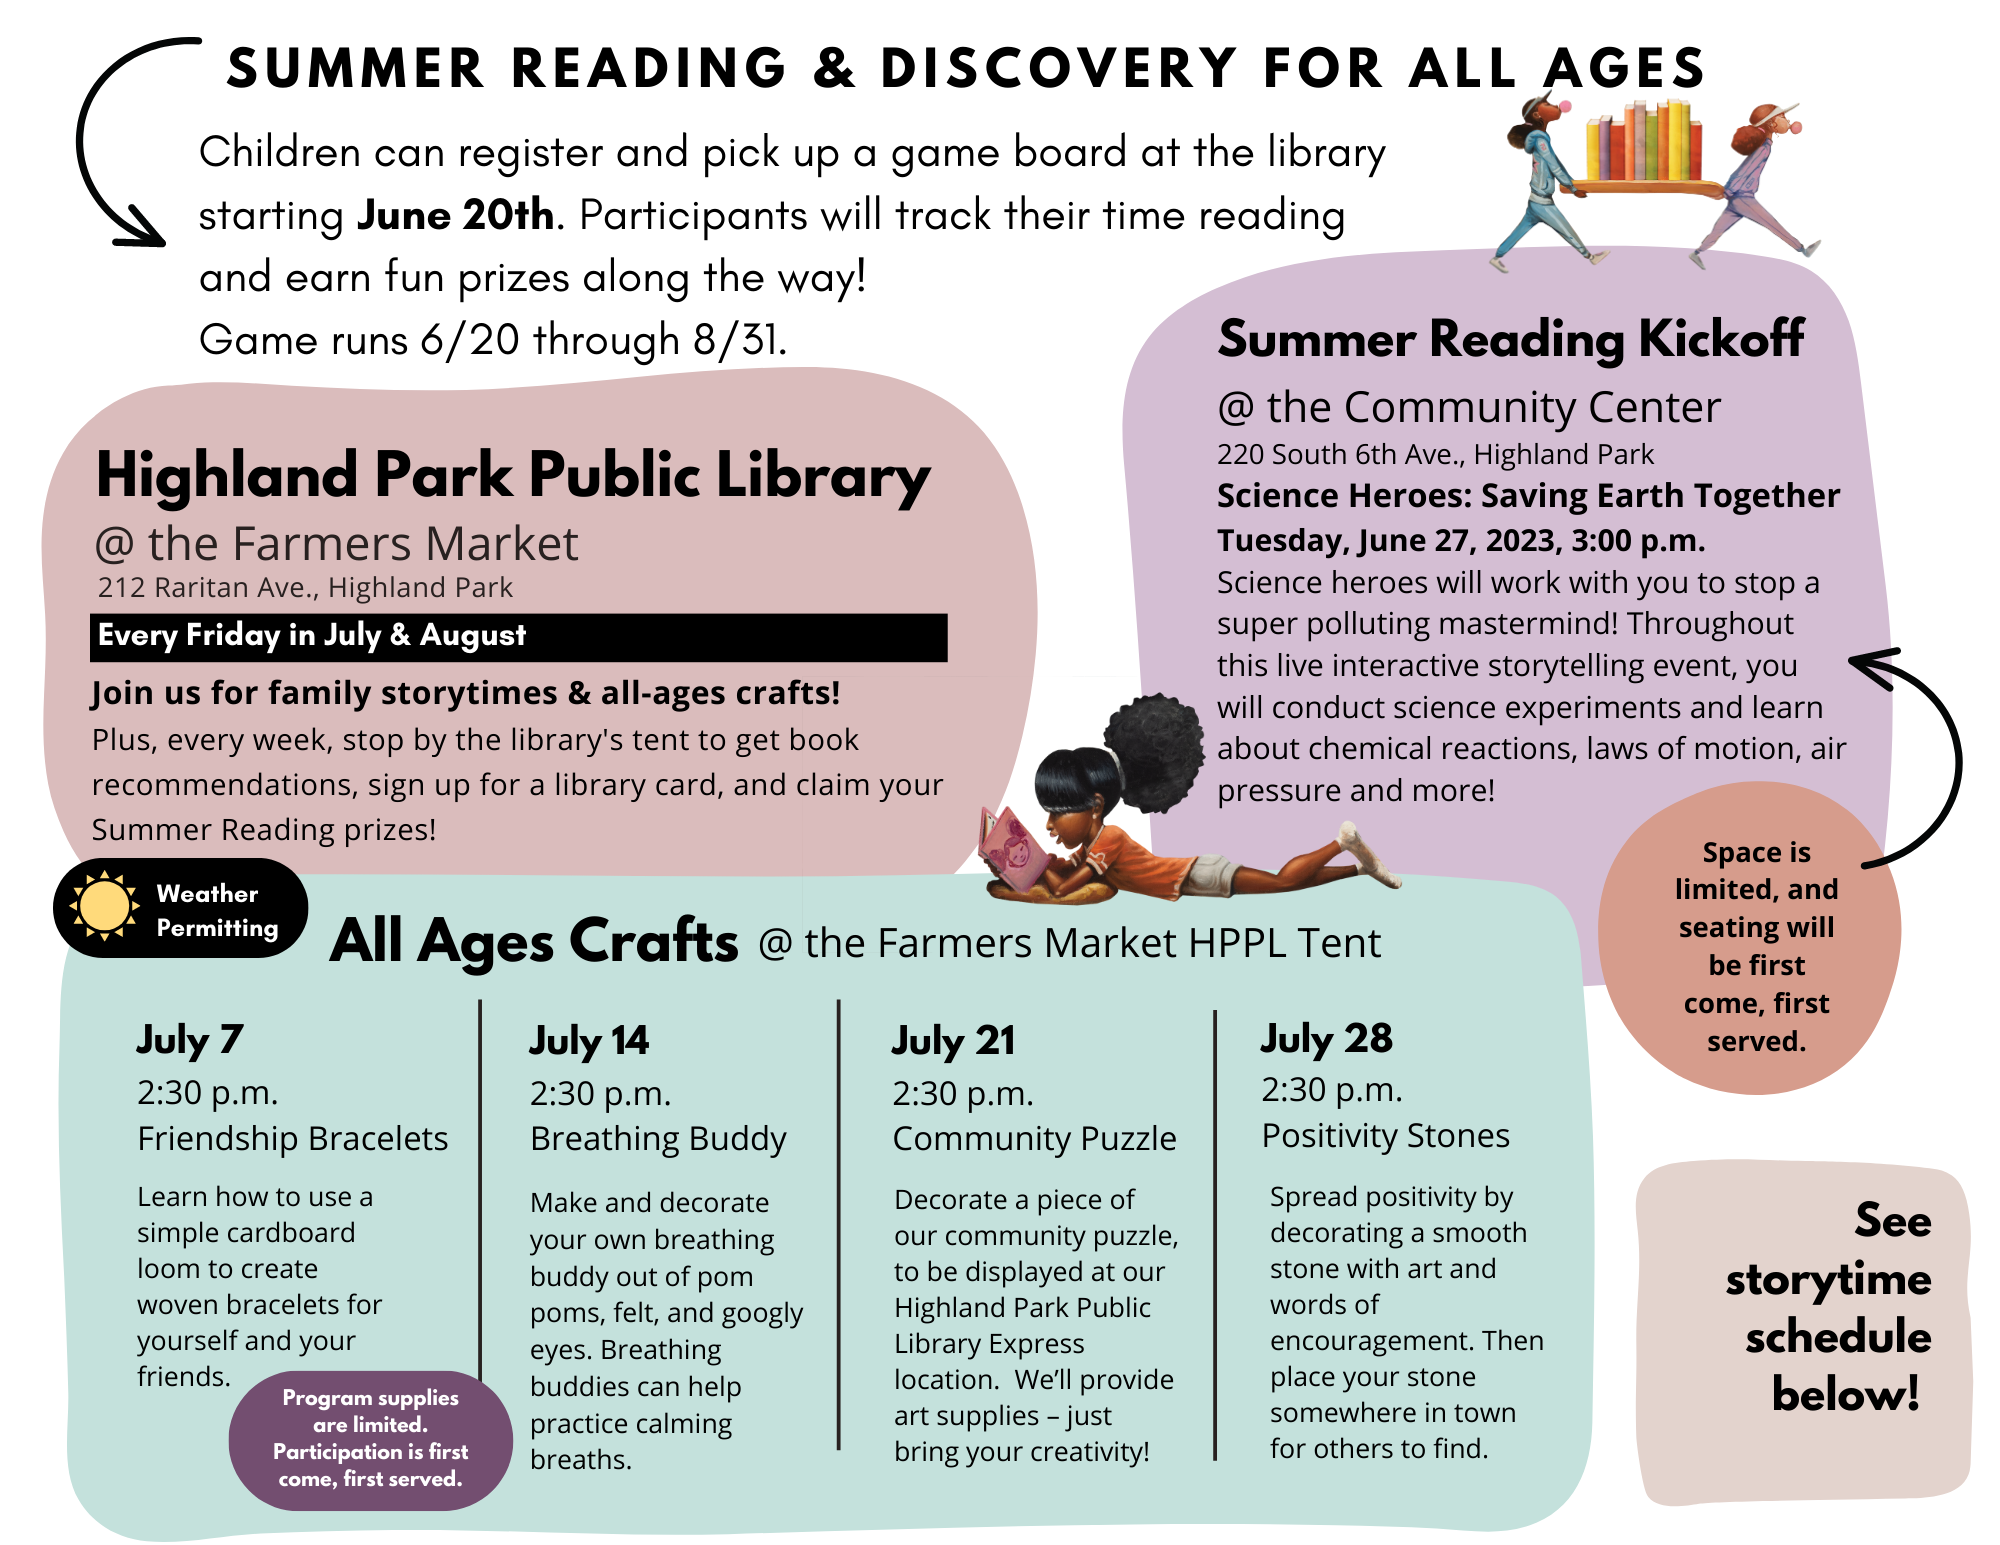 Summer Reading & Discovery for All Ages! Children can register and pick up a game board at the librayr starting june 20th. participants will track their time reading and earn fun prizes along the way! Game runs 6/20 through 8/31. Summer Reading Kickoff at the Community Center 220 South 6th Ave Science Heroes: Saving Earth Together Tuesday, June 27, 2023, 3:00 p.m. Science heroes will work with you to stop a super polluting mastermind! Throughout this live interactive storytelling event, you will conduct science experiments and learn about chemical reactions, laws of motion, air pressure and more! Space is limited and seating will be first come, first served. Highland Park Public Library @ the Farmers Market 212 Raritan Ave. Every Friday in July & August. Join us for family storytimes & all-ages crafts! Outdoor programming is all weather permitting. Plus, every week, stop by the library's tent to get book recommendations, sign up for a library card, and claim your Summer Reading prizes! All Ages Crafts @ The Farmers Market HPPL Tent July 7 2:30 pm friendship bracelets: Learn how to use a simple cardboard loom to create woven bracelets for yourself and your friends. July 14 2:30 pm Breathing Buddy Make and decorate your own breathing buddy out of pom poms, felt, and googly eyes. Breathing buddies can help practice calming breaths. July 21 2:30 pm Community Puzzle Decorate a piece of our community puzzle, to be displayed at our Highland Park Public Library Express location. We’ll provide art supplies – just bring your creativity! July 28 2:30 pm Positivity Stones Spread positivity by decorating a smooth stone with art and words of encouragement. Then place your stone somewhere in town for others to find. Program supplies are limited. Participation is first come, first served See Storytime Schedule Below 